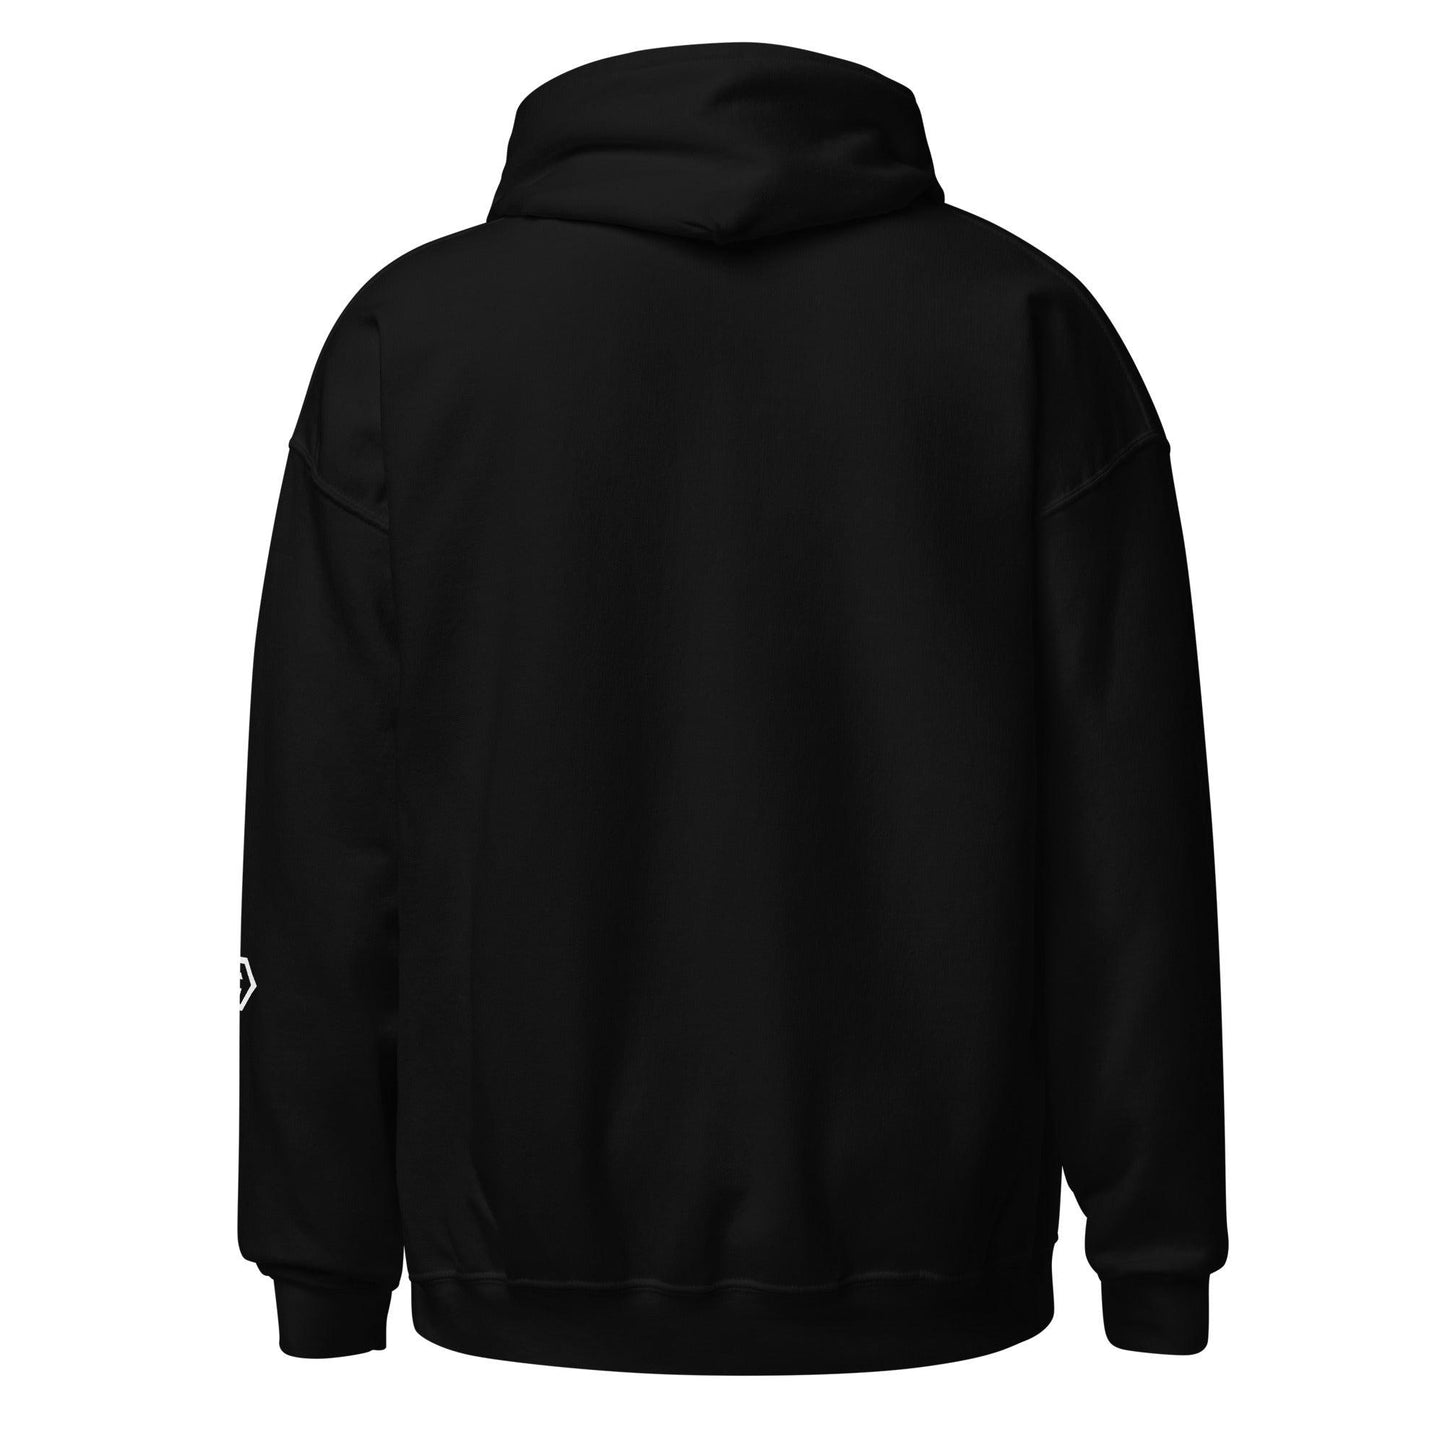 Court Prowess "Solo" Hoodie - Fan Arch